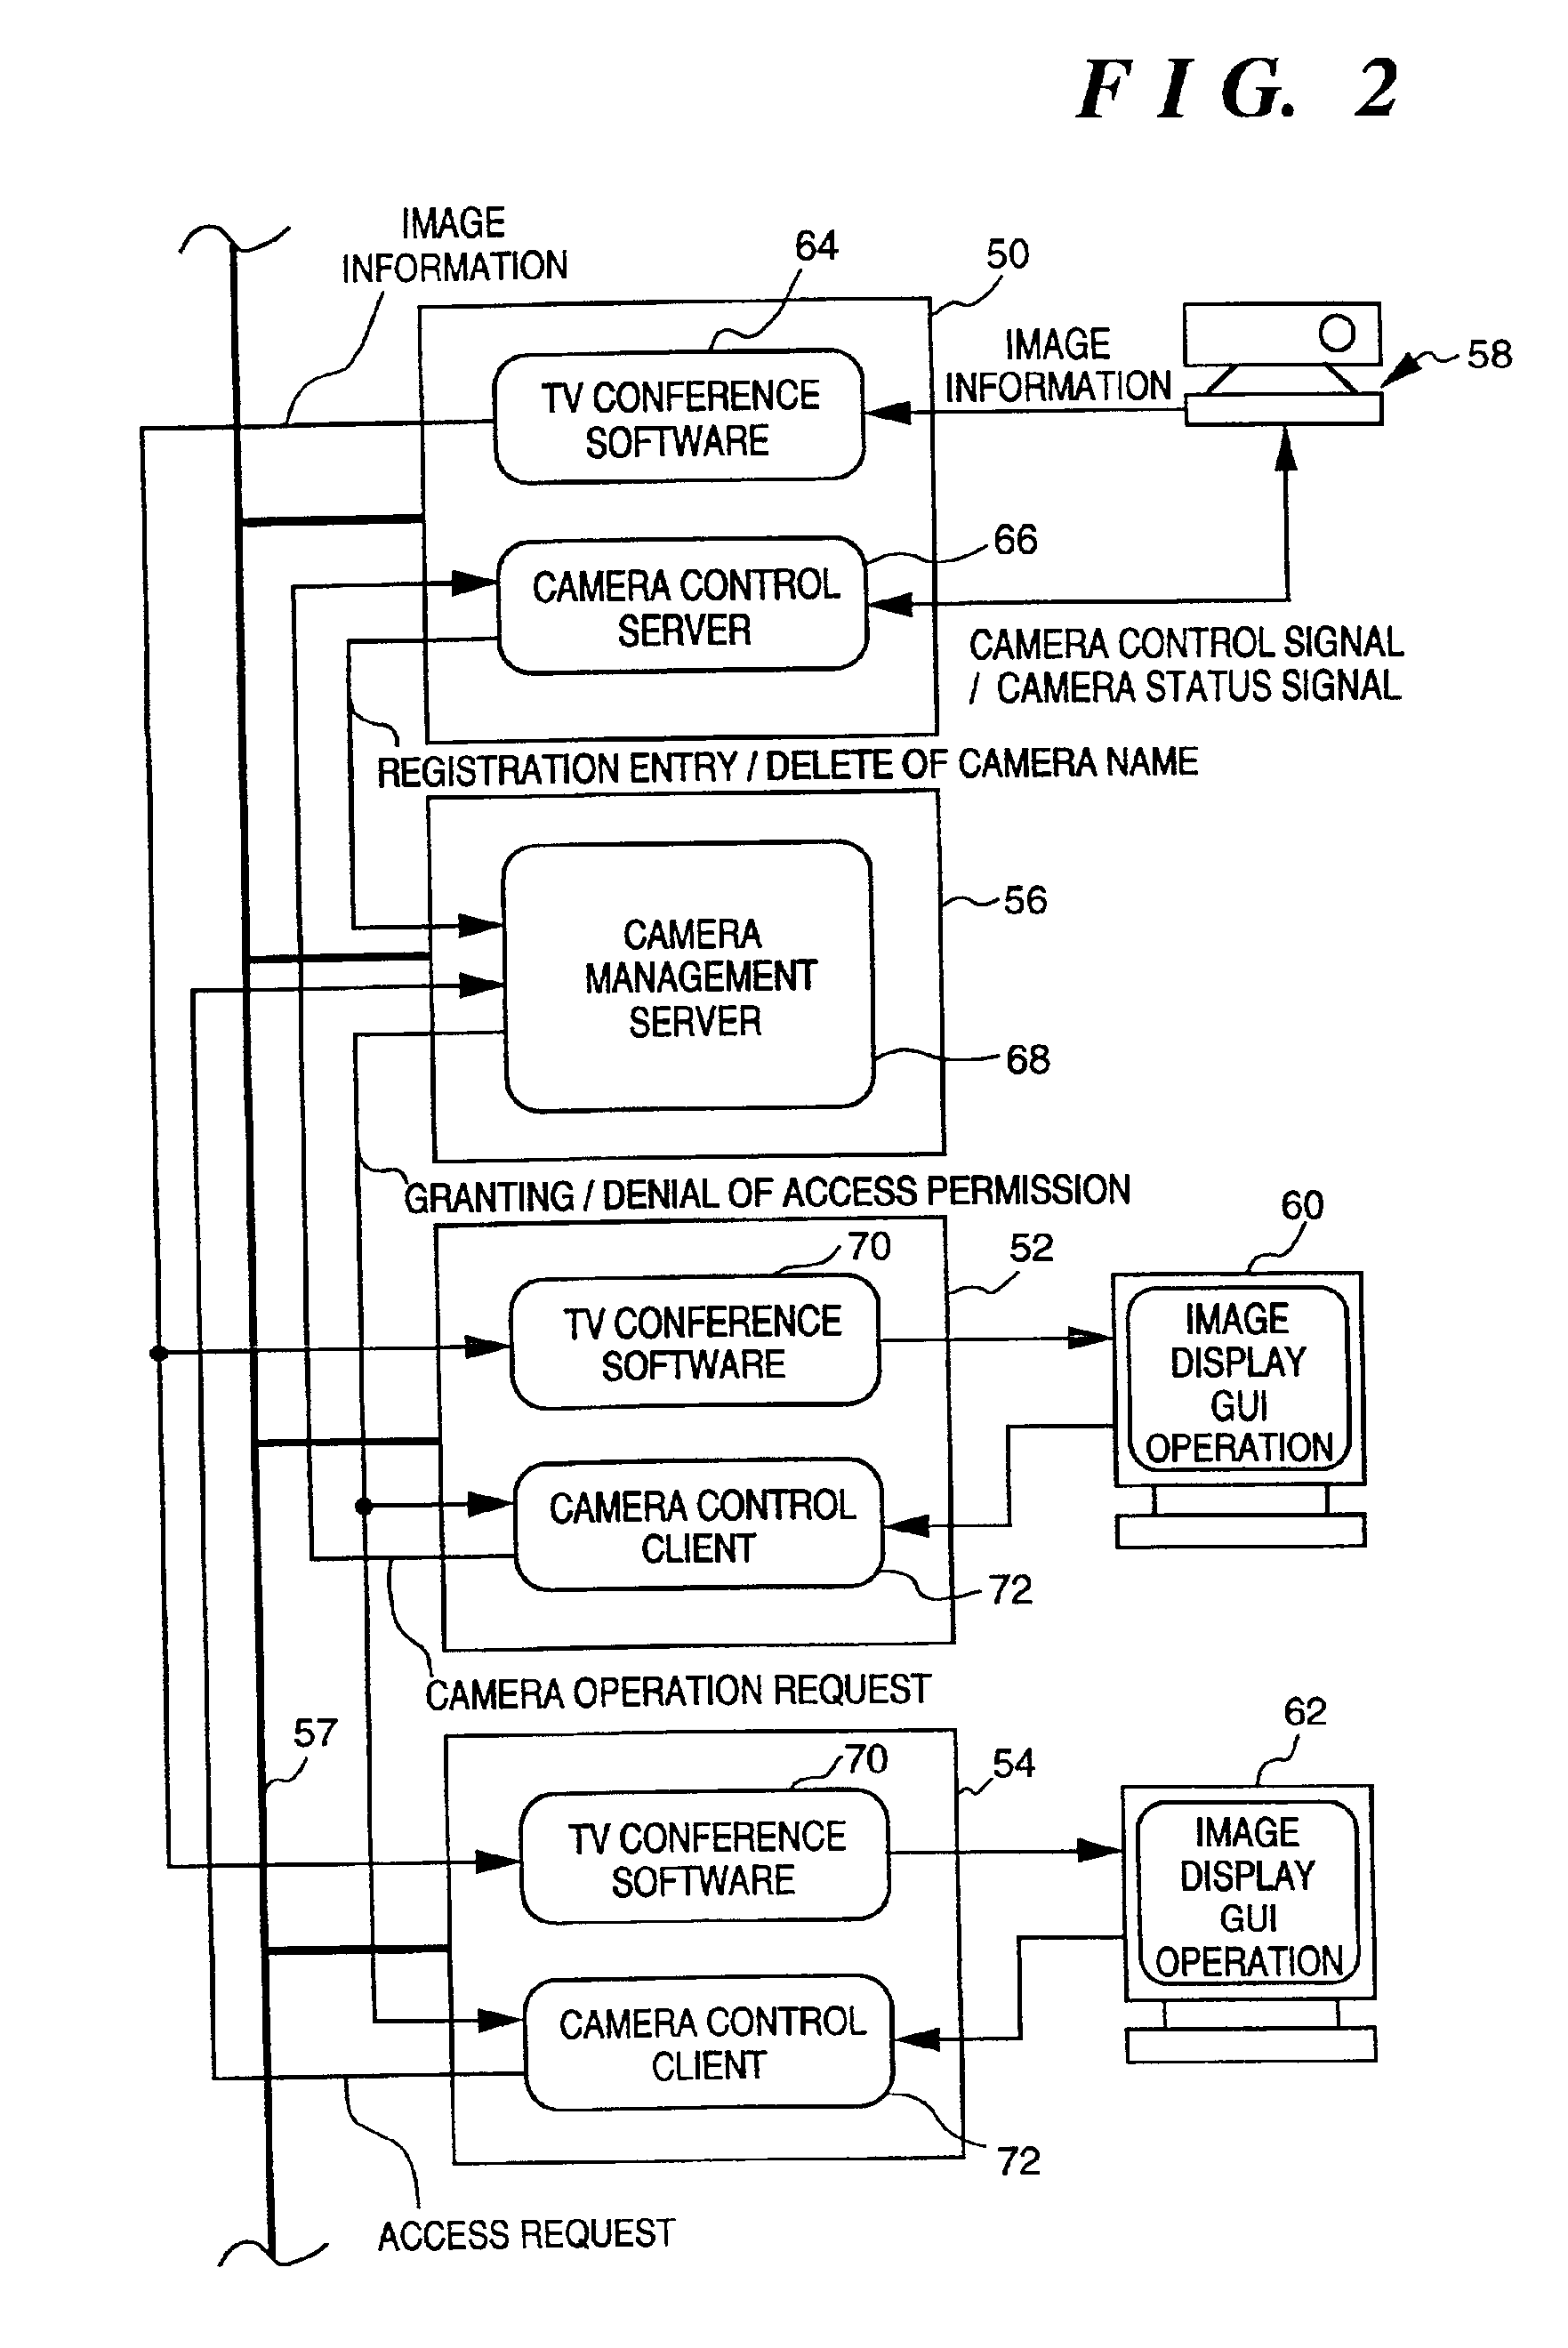 Remote control system and access control method for information input apparatus with limitation by user for image access and camemremote control